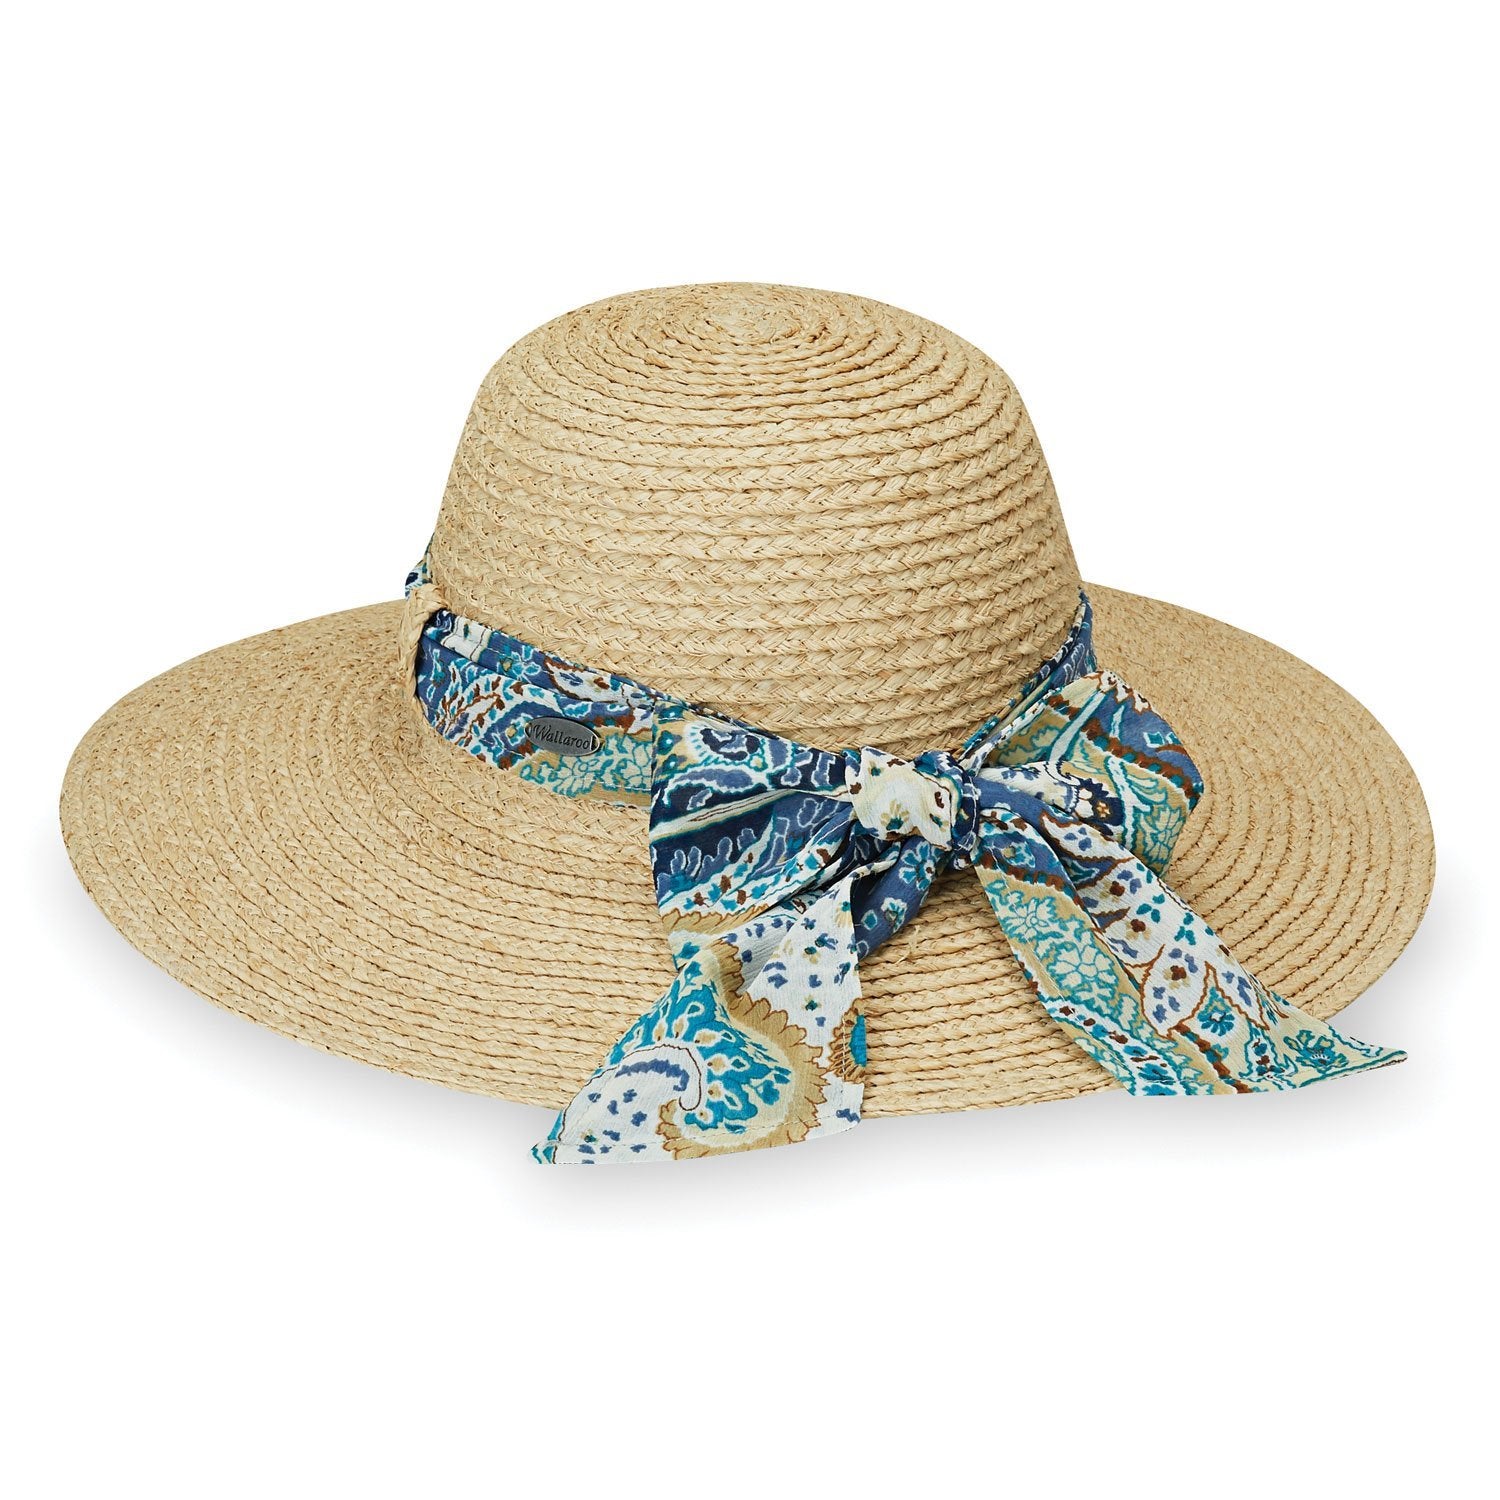 Featuring Women's Adjustable Wide Brim Sausalito UPF Raffia Sun Hat with Ribbon in Natural from Wallaroo